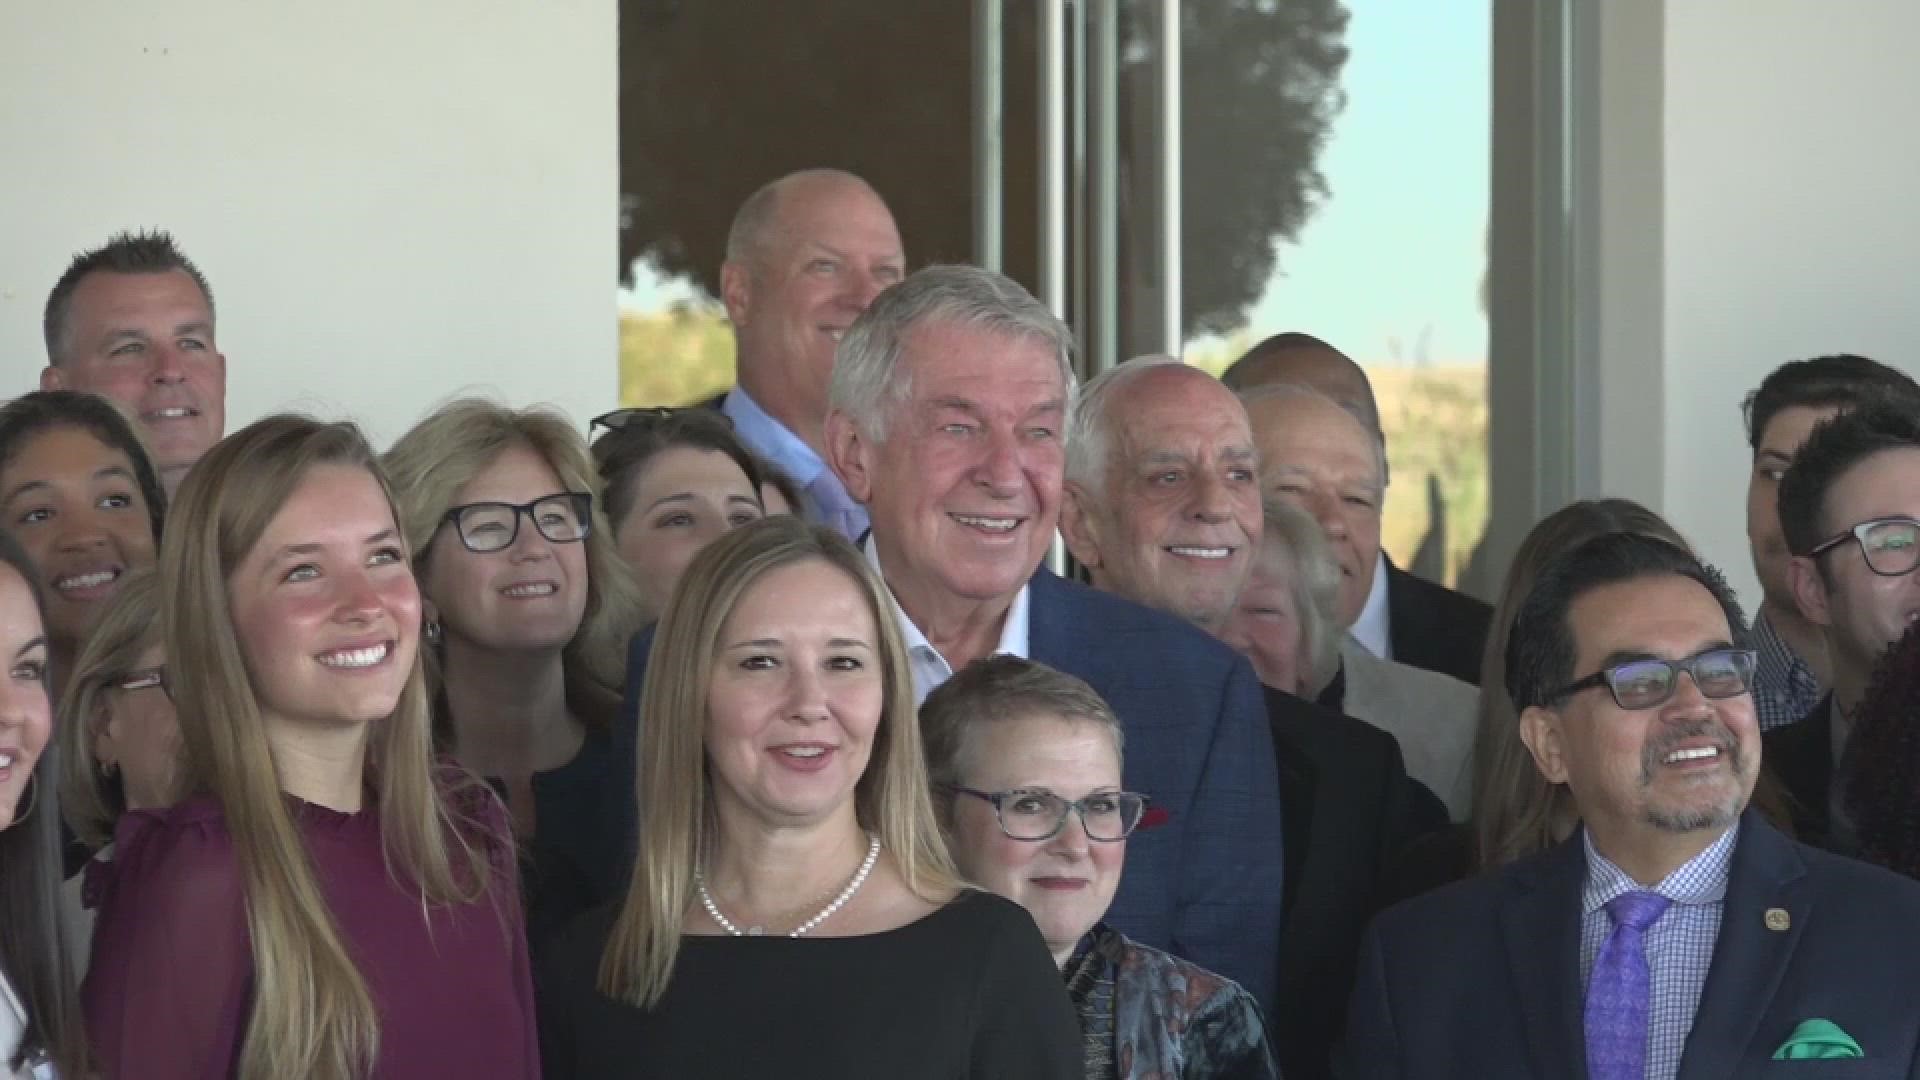 Jerry Colangelo, a Valley icon in business and sports, discussed with 12News his decision to endorse Kari Lake for governor of Arizona.